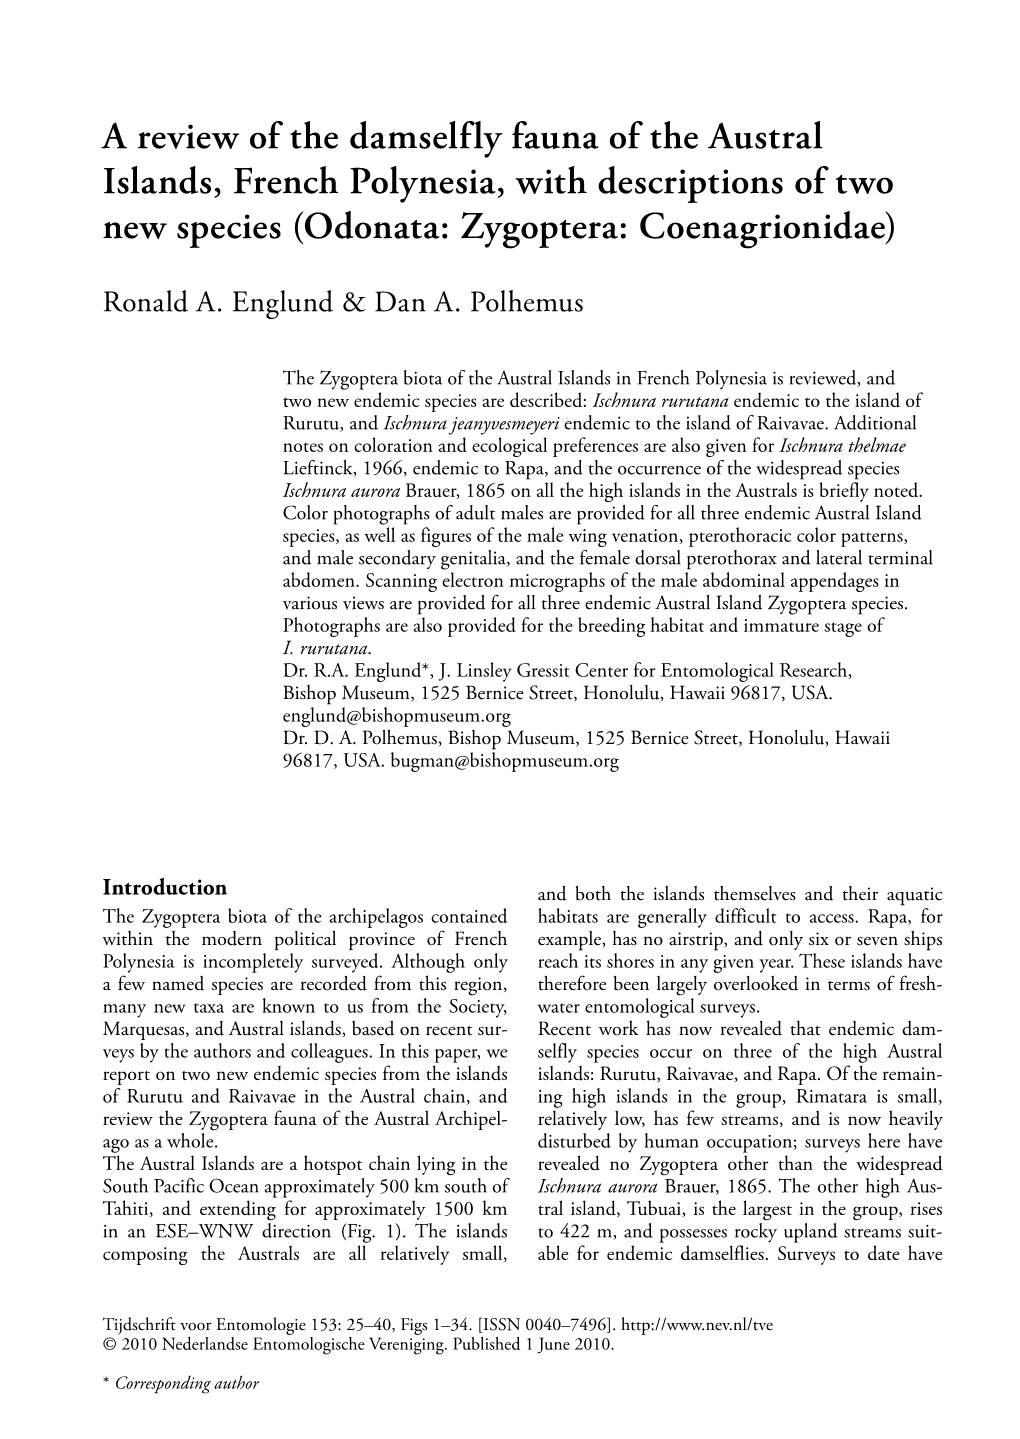 A Review of the Damselfly Fauna of the Austral Islands, French Polynesia, with Descriptions of Two New Species (Odonata: Zygoptera: Coenagrionidae)